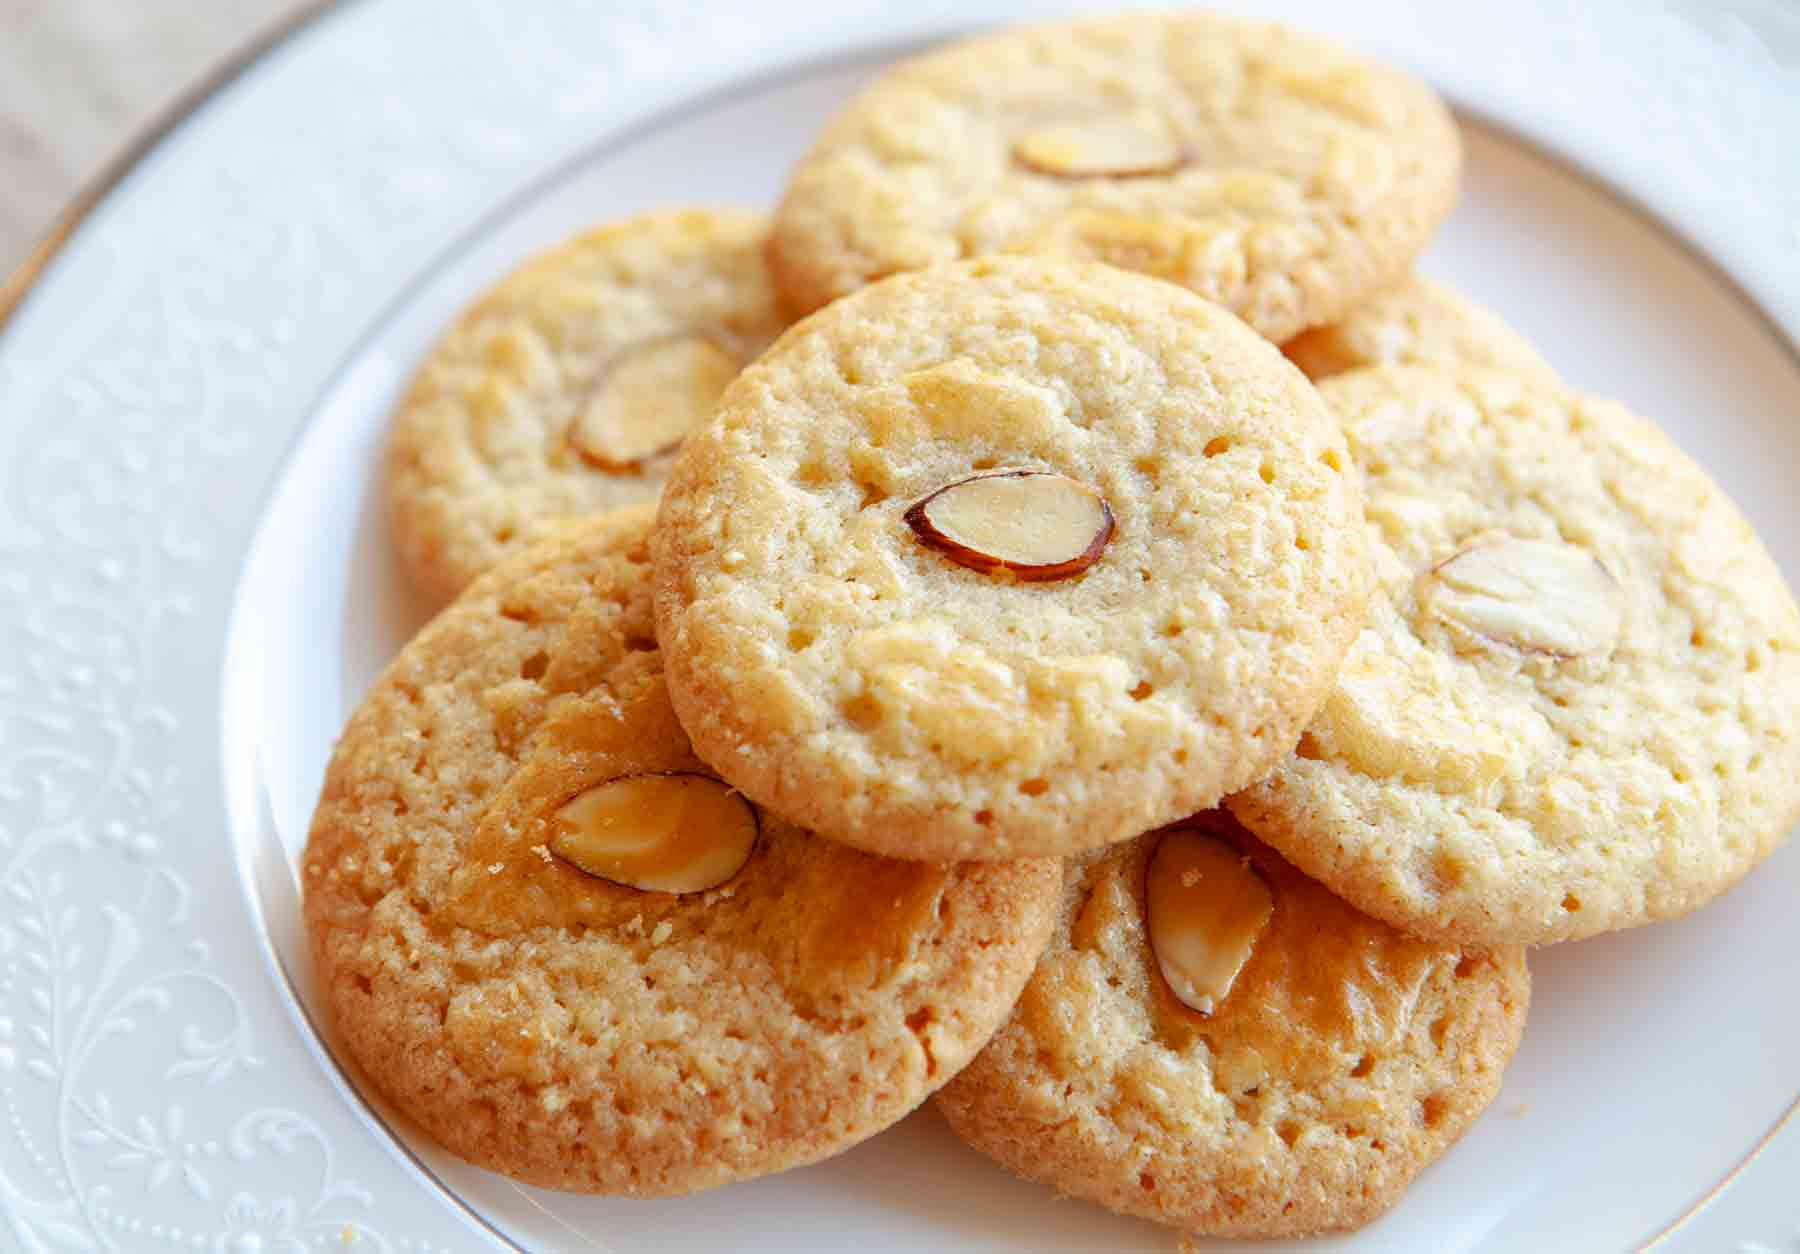 Chinese Almond Cookie Recipes
 Chinese Almond Cookies Recipe